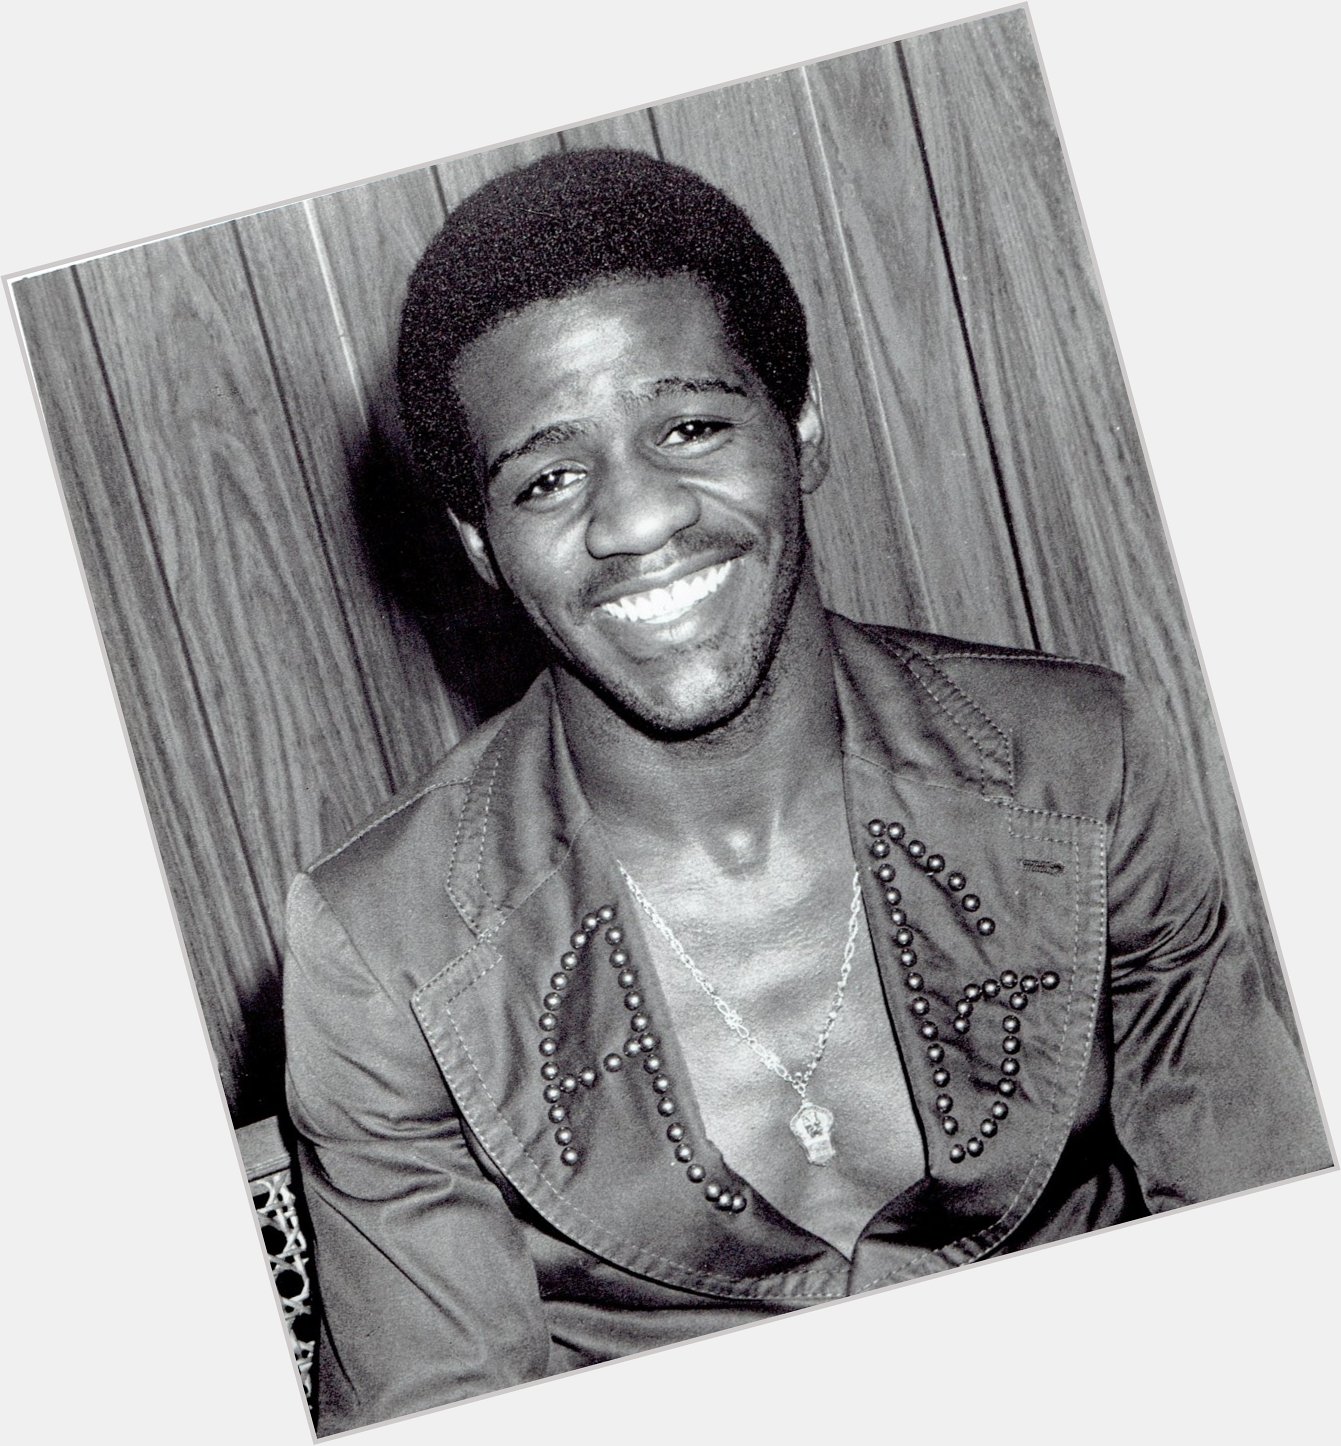 Legendary soul singer, songwriter, and record producer Al Green turns 75 today. Wishing him a Happy Birthday! 